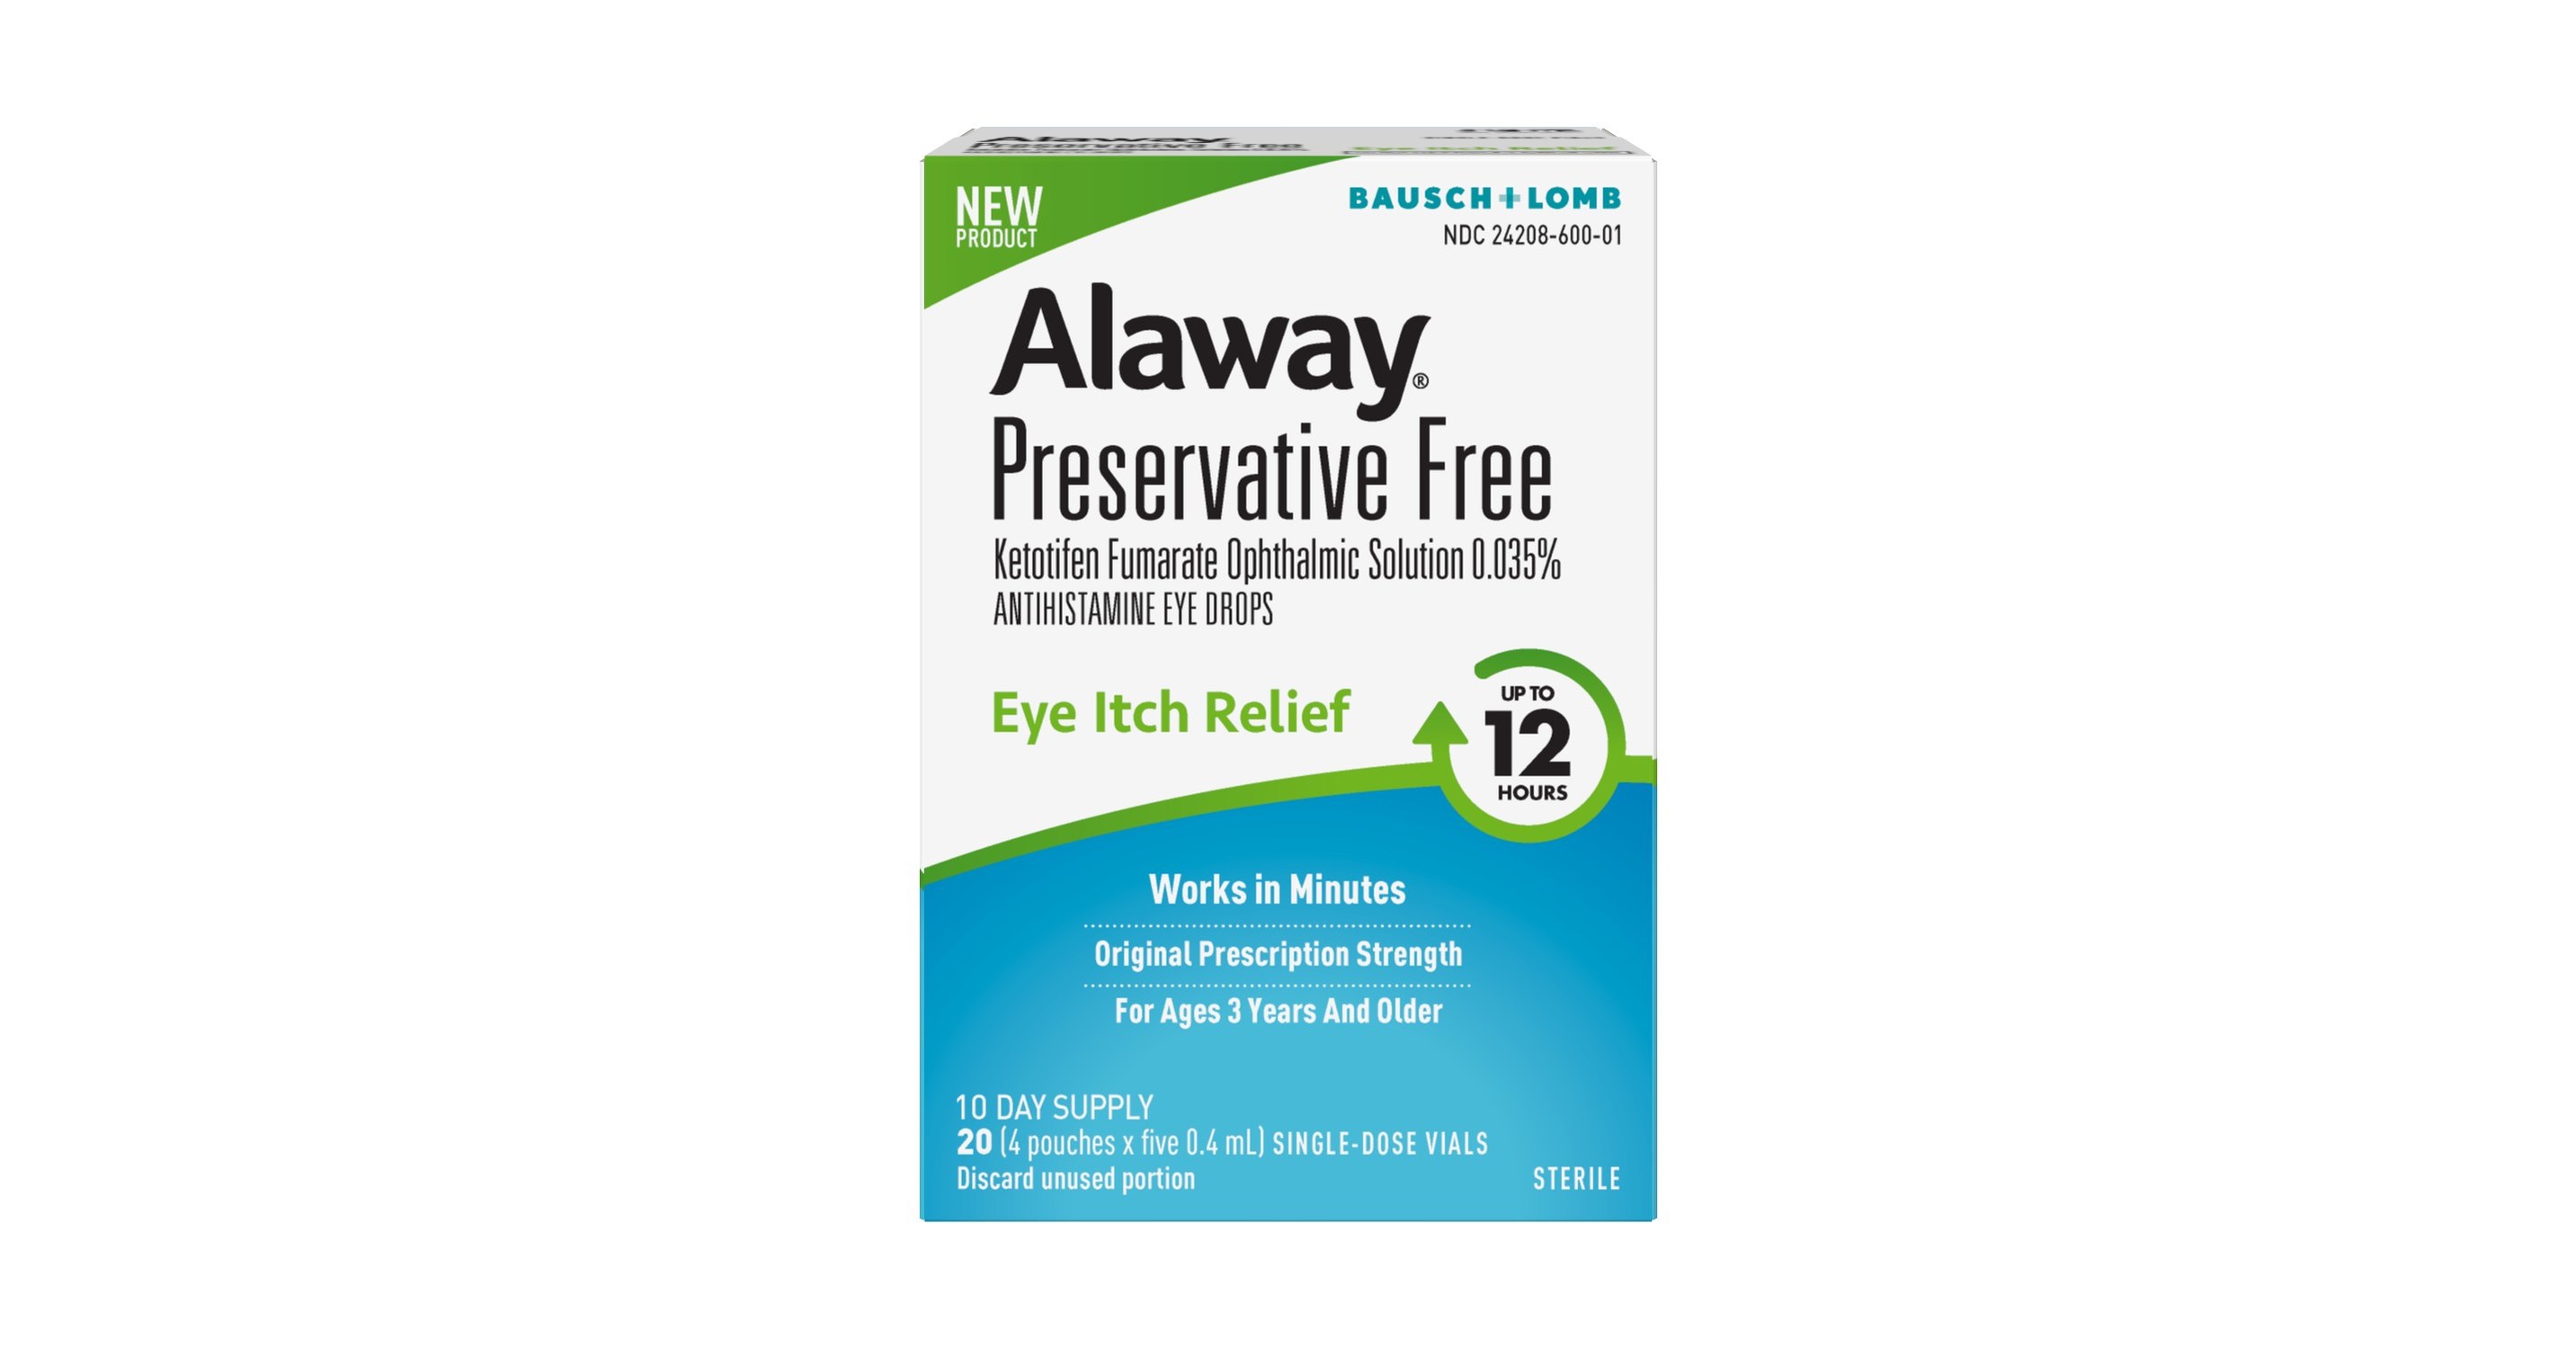 Bausch + Lomb Launches Alaway® Preservative Free Antihistamine Eye Drops